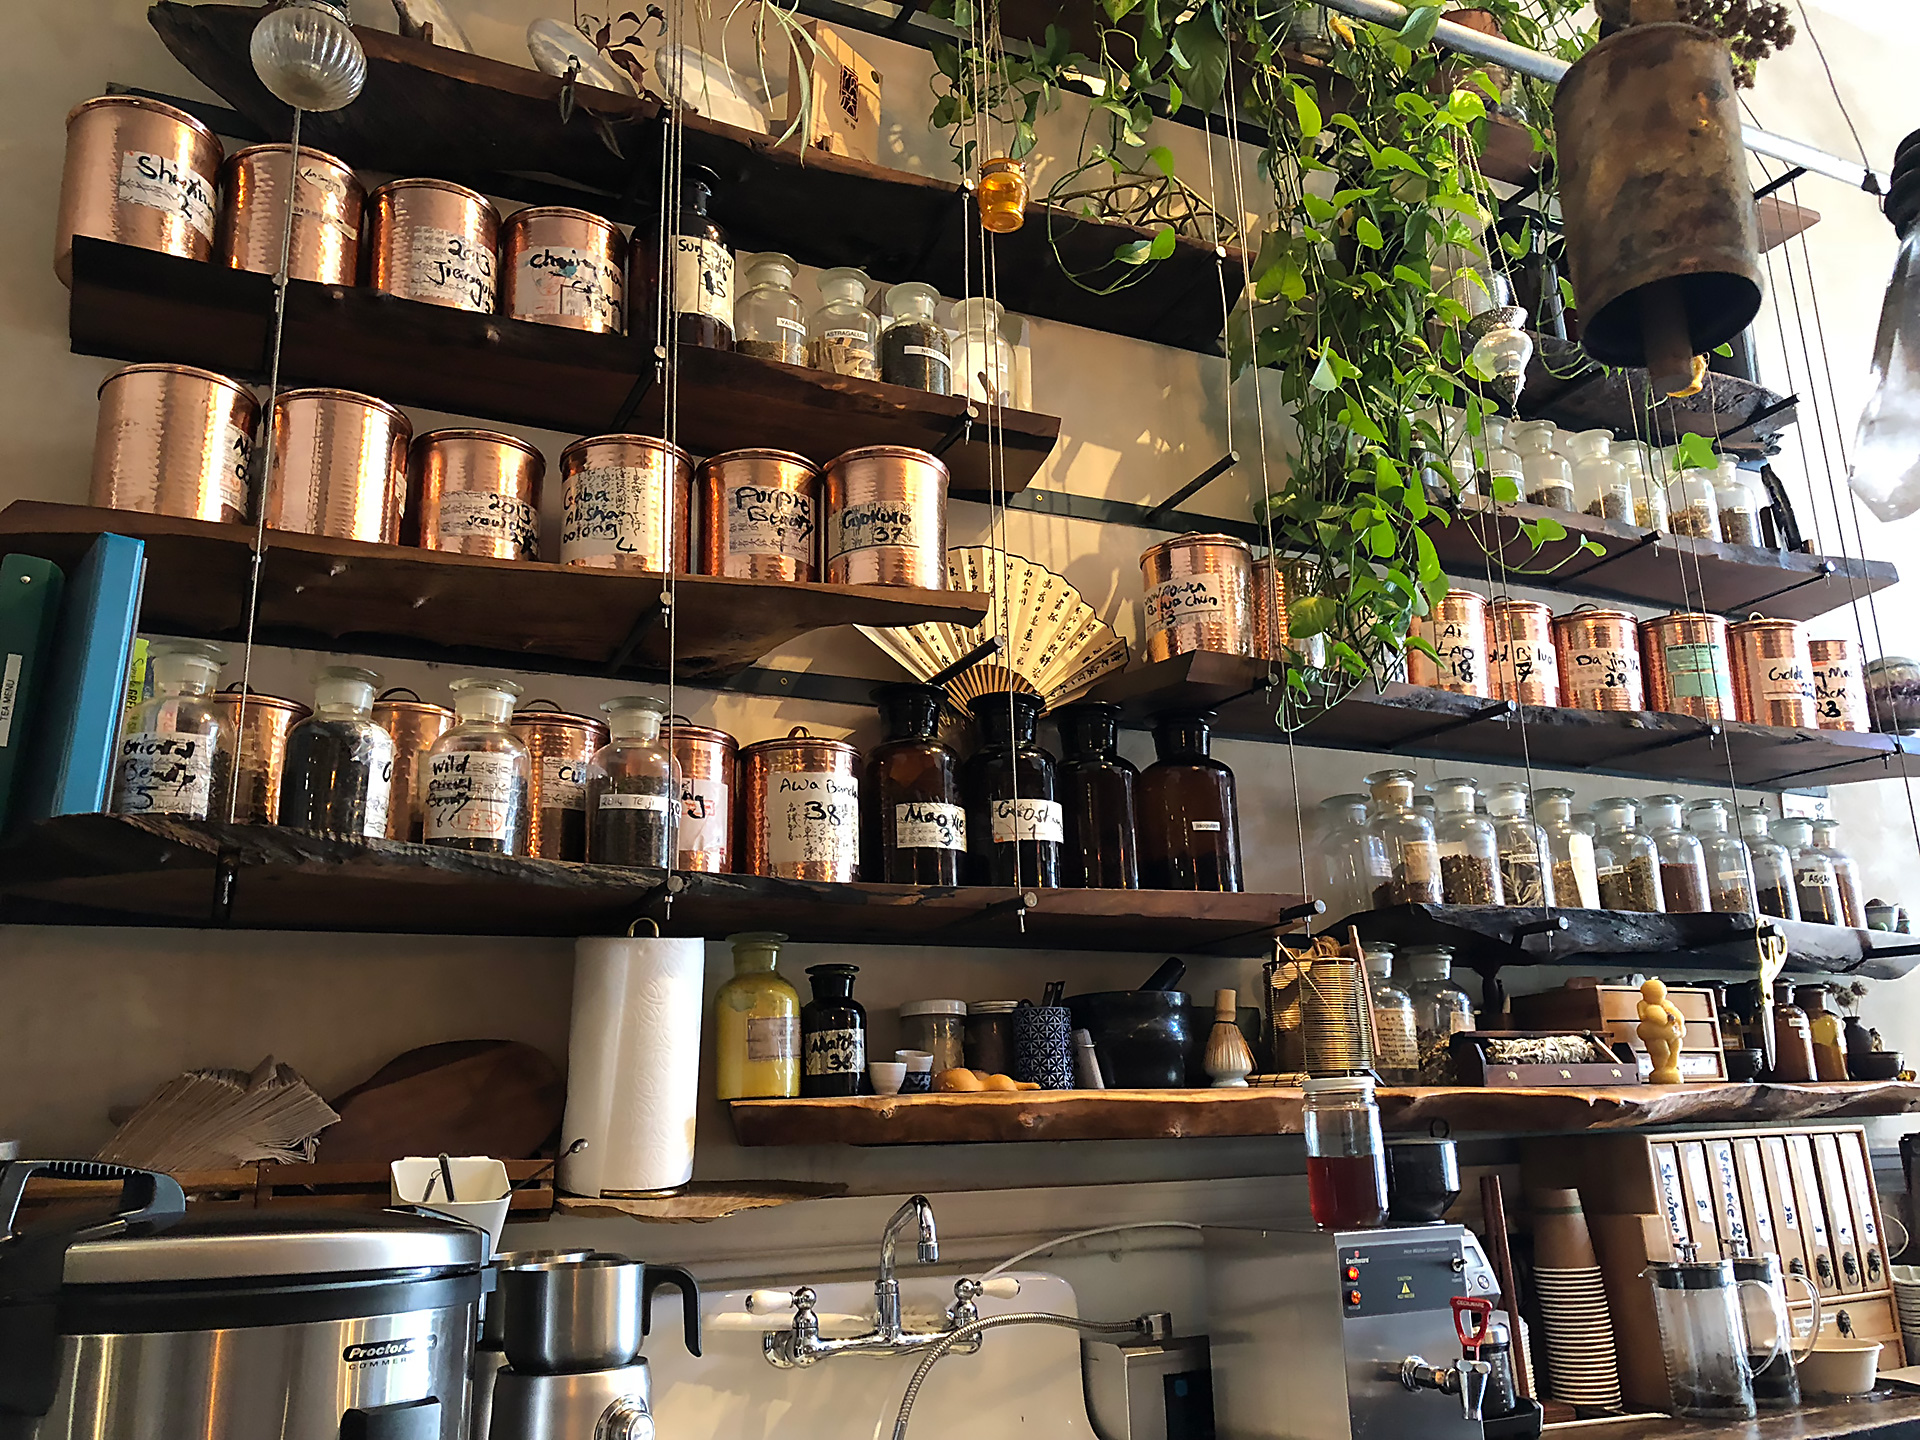 The shelves at Beloved Café are lined with herbs, teas and elixirs.